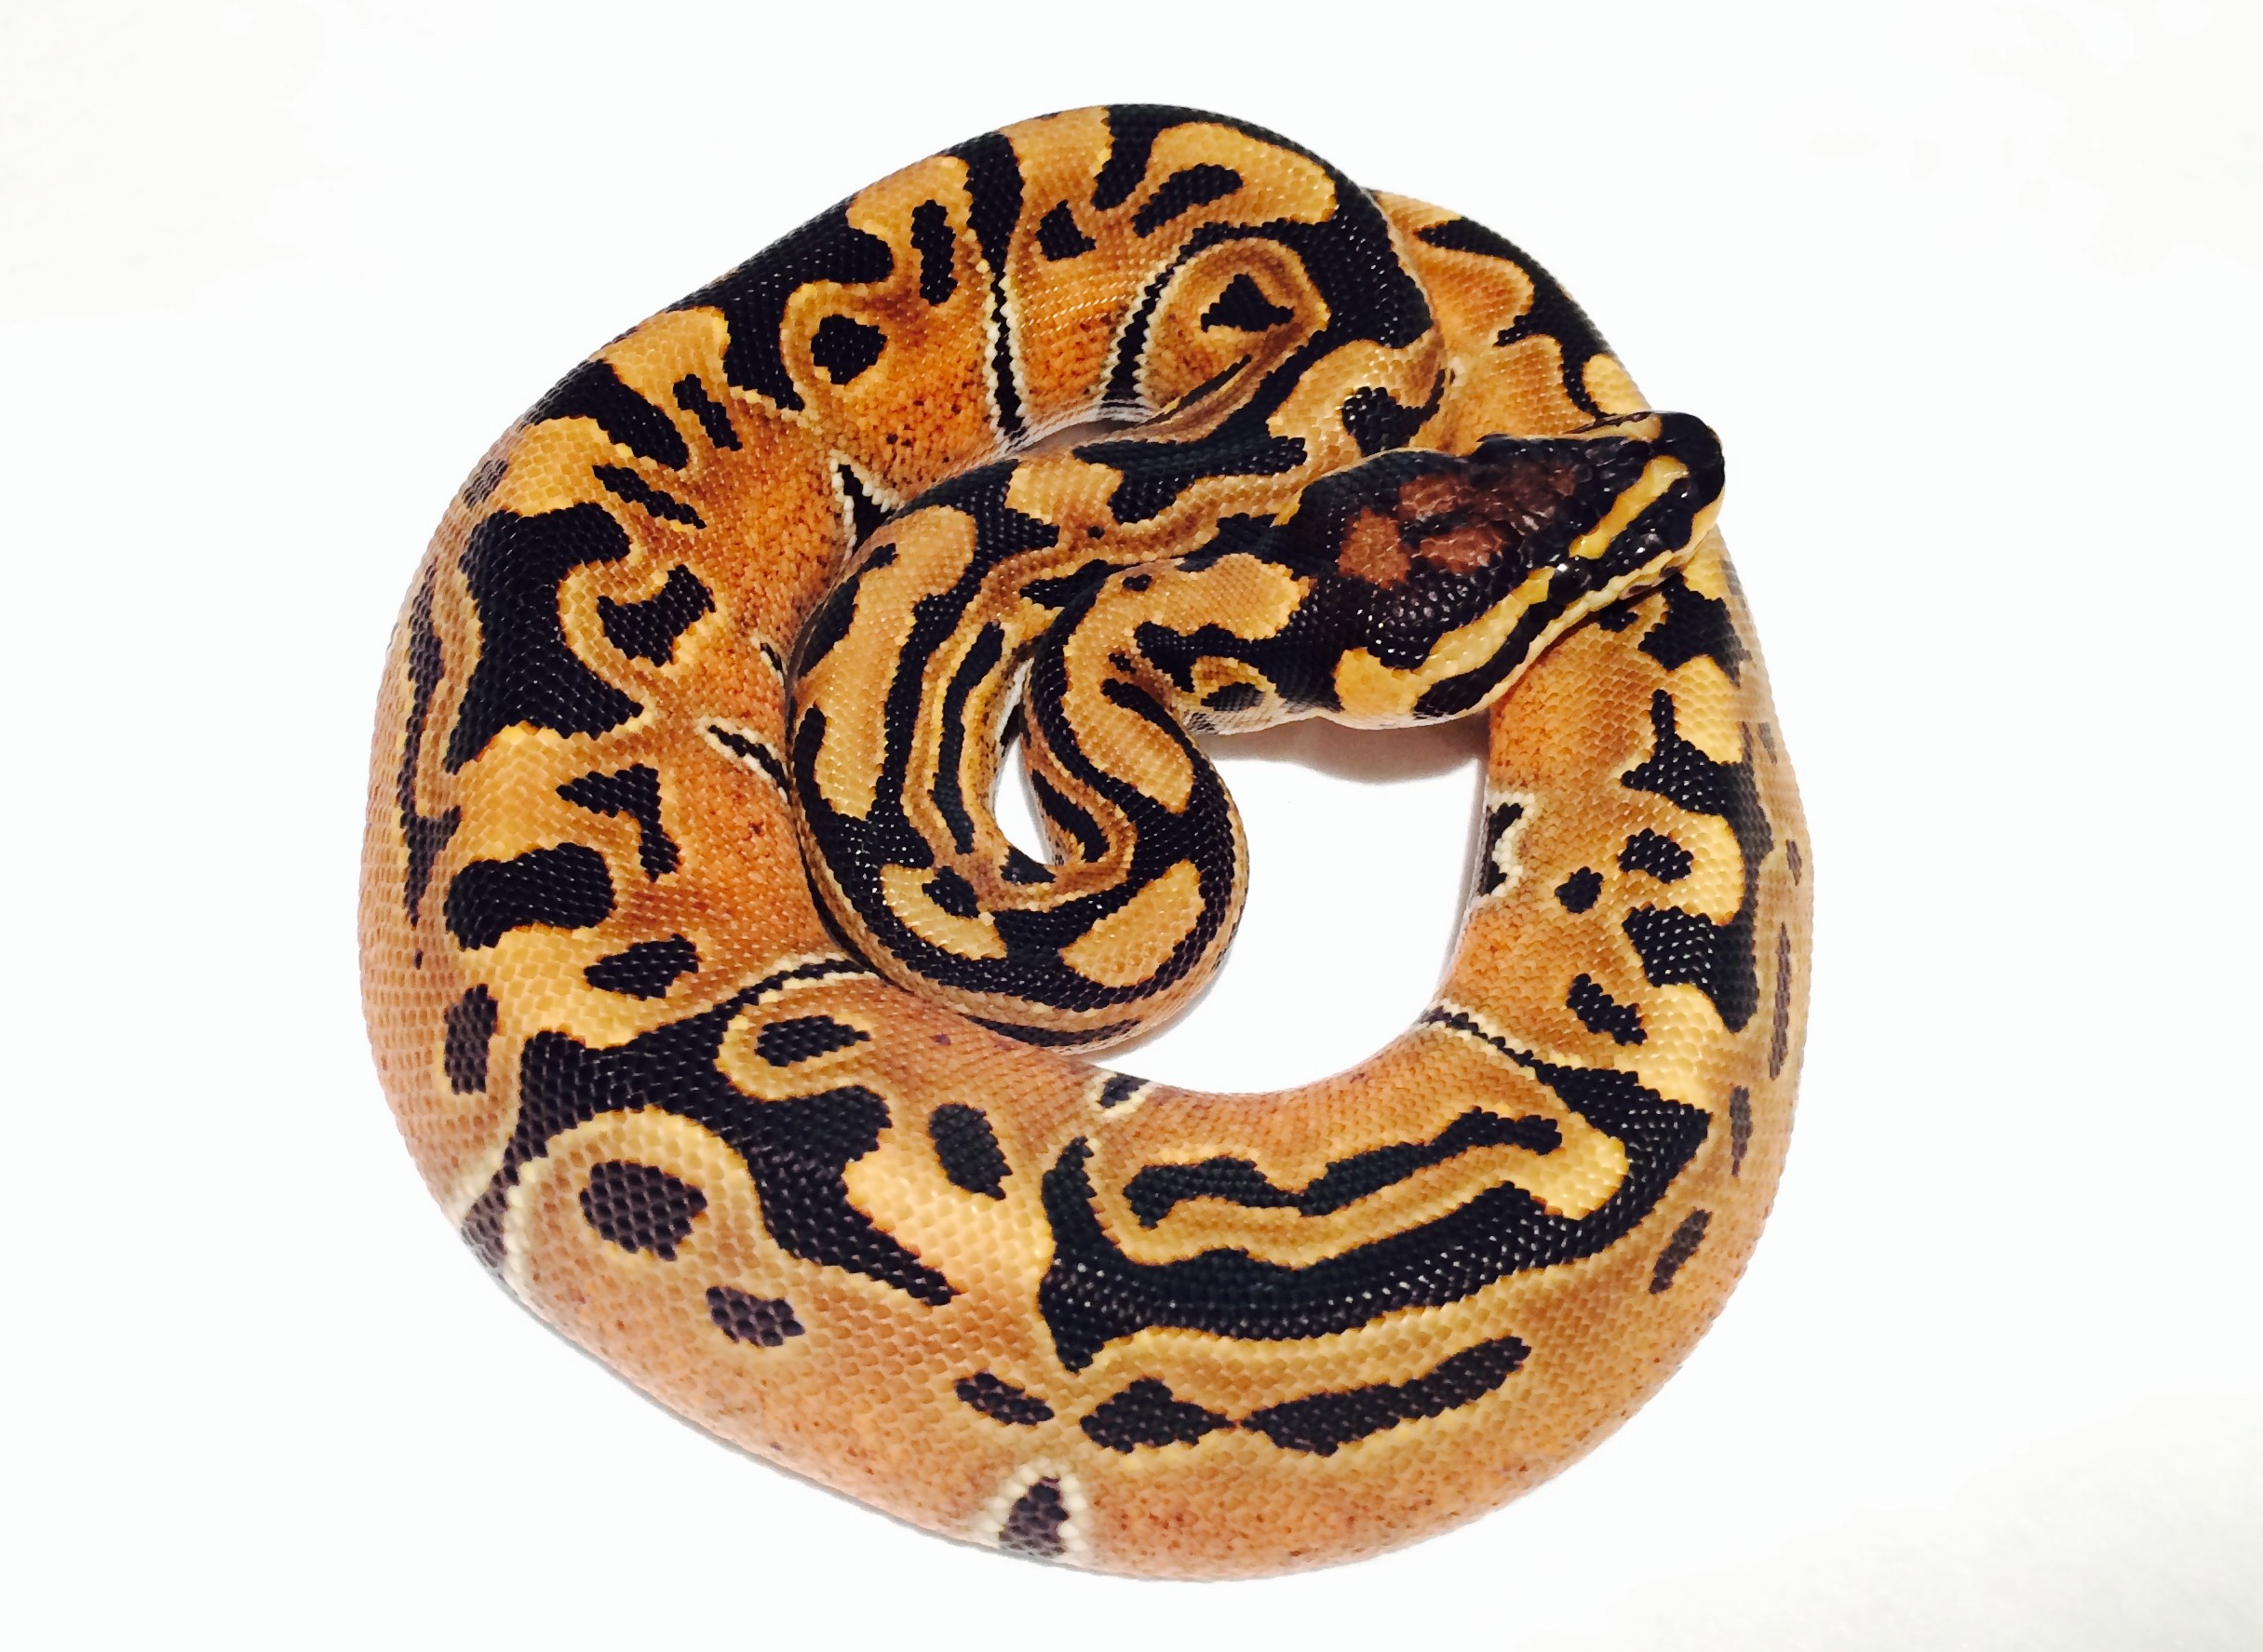 Super Jungle Woma Ball Python by Havens Reptiles